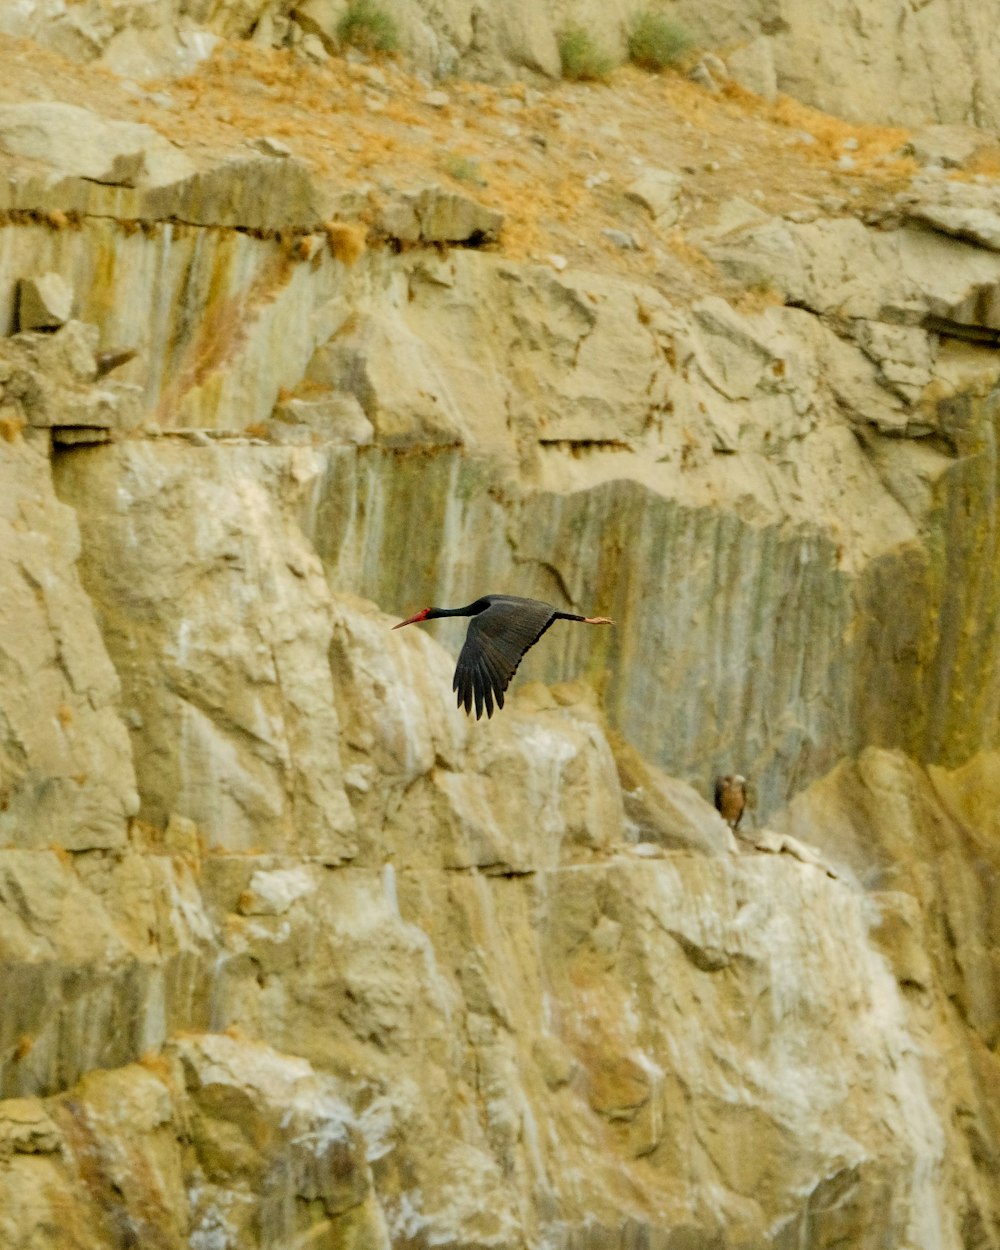 a large bird flying over a rocky cliff